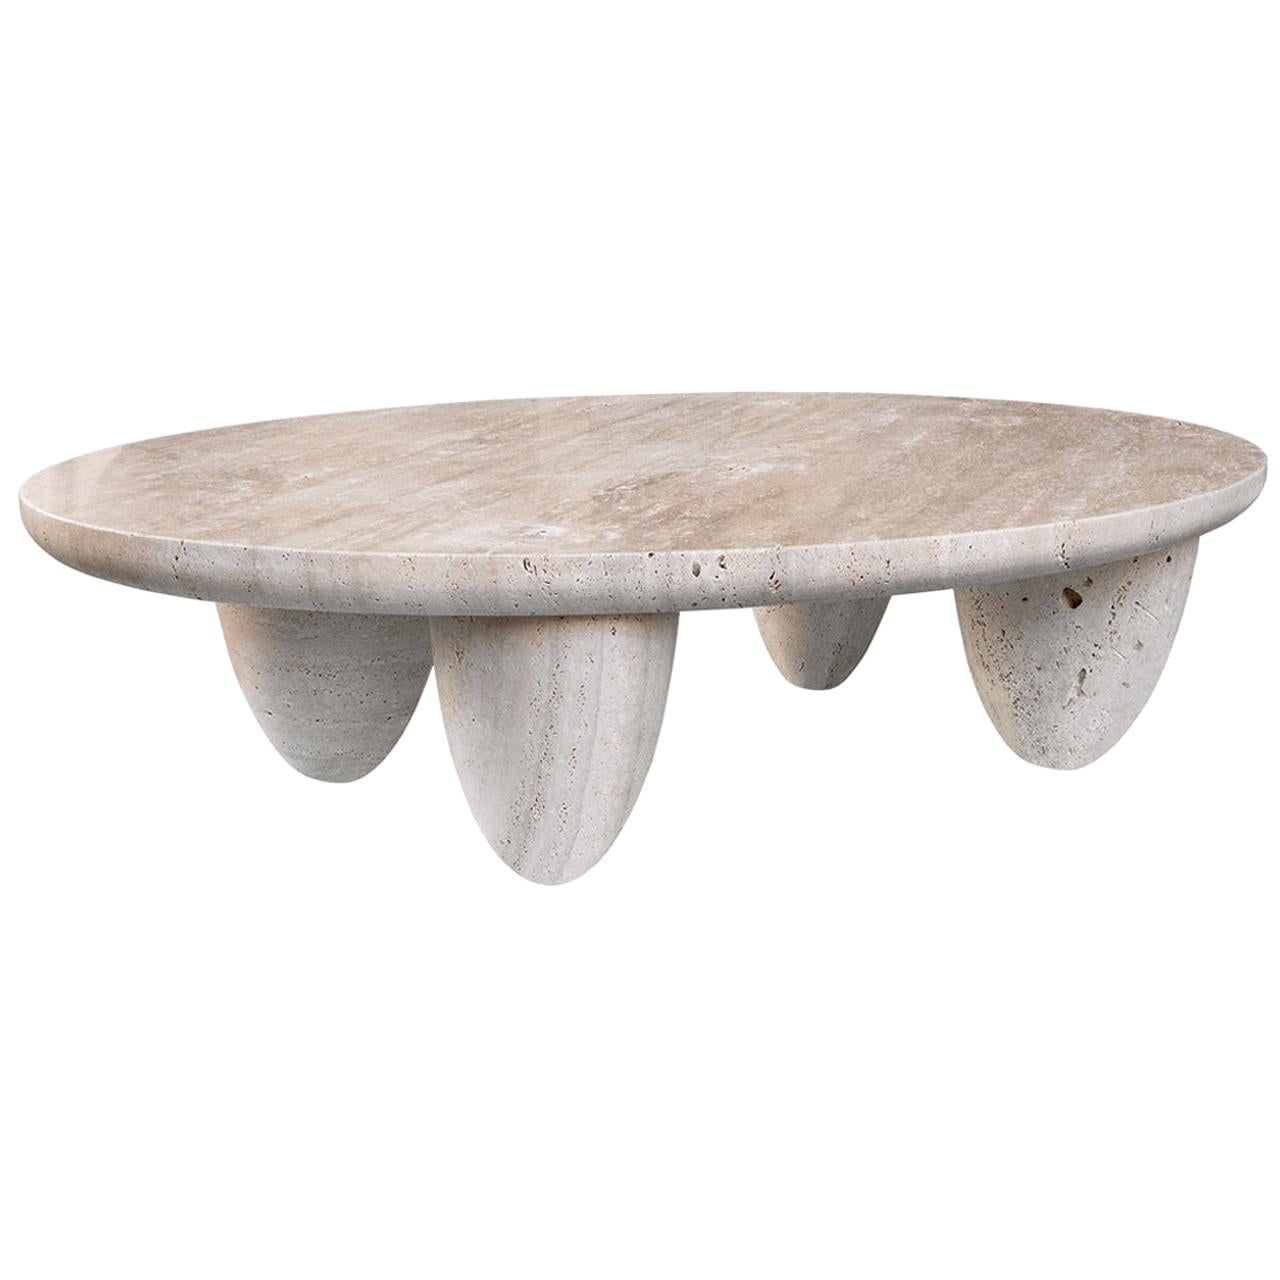 Contemporary Minimal Round Coffee Center Table in Travertine Stone Natural Pores For Sale